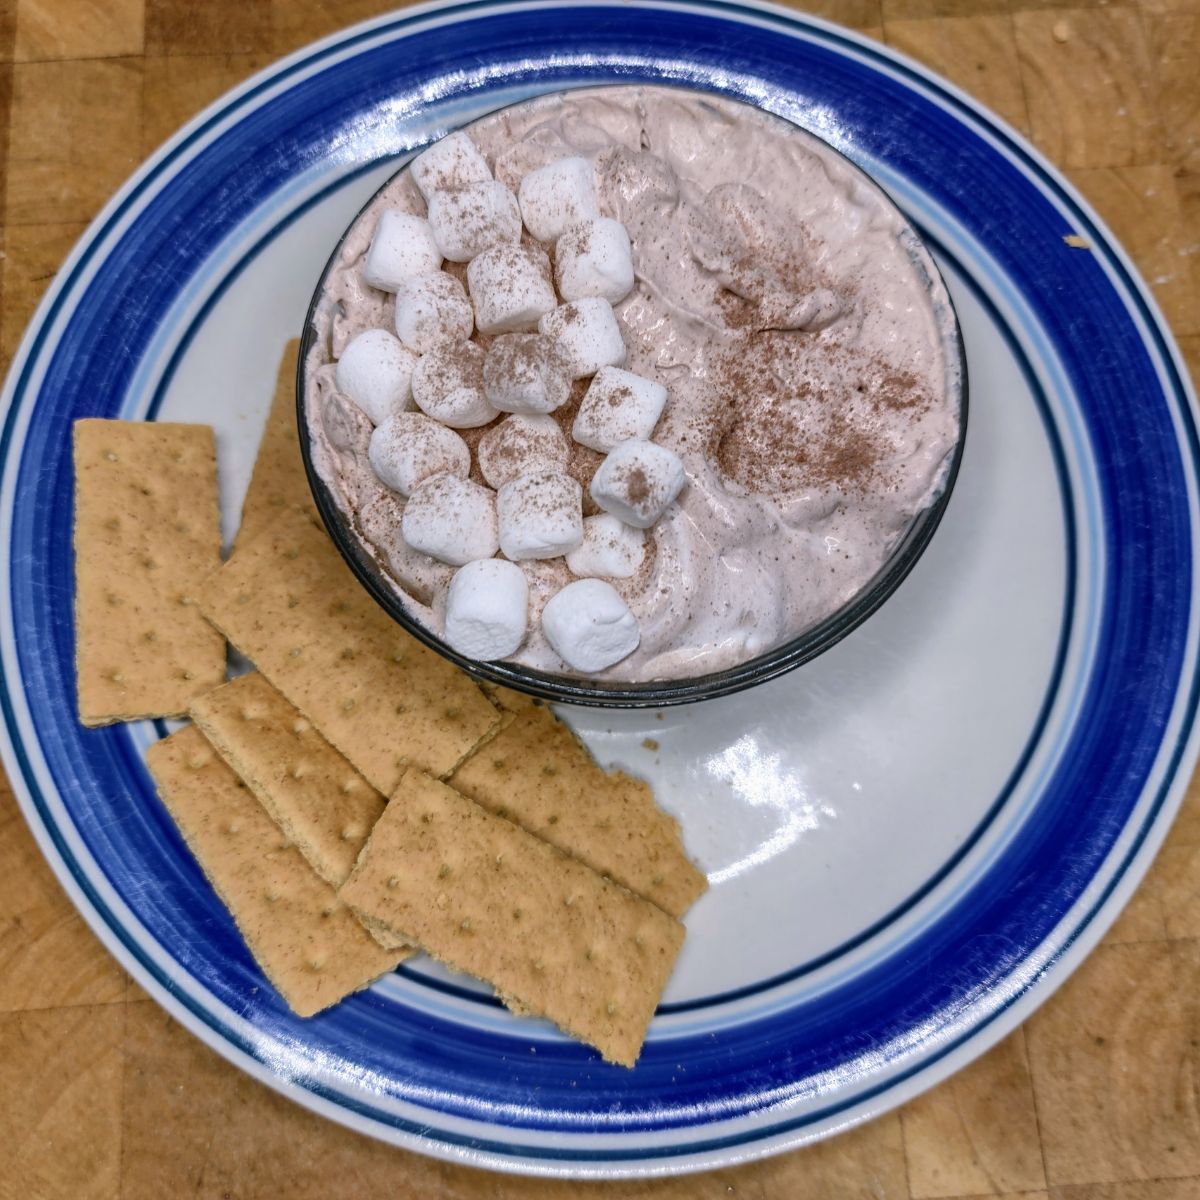 Hot chocolate dip in a bowl on a plate next to graham crackers.